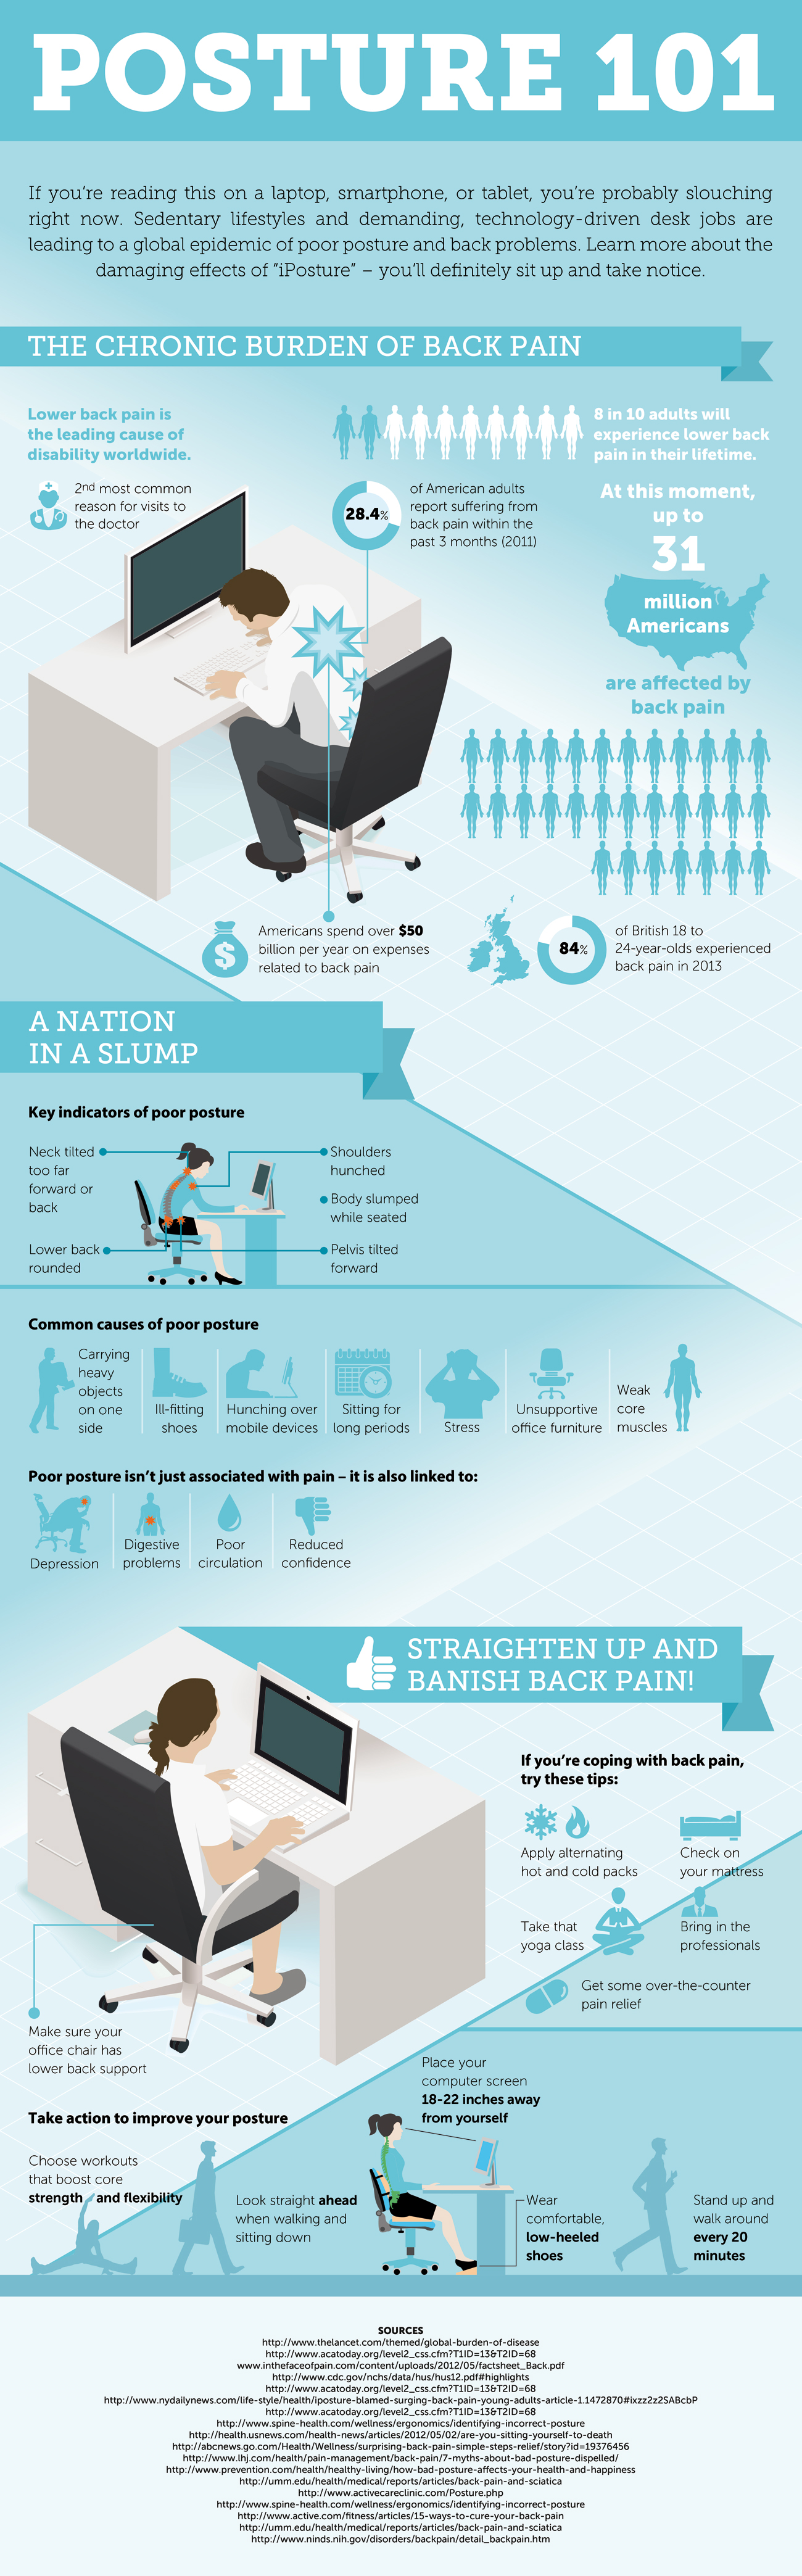 Simple Ways To Improve Your Posture Right Now Infographic